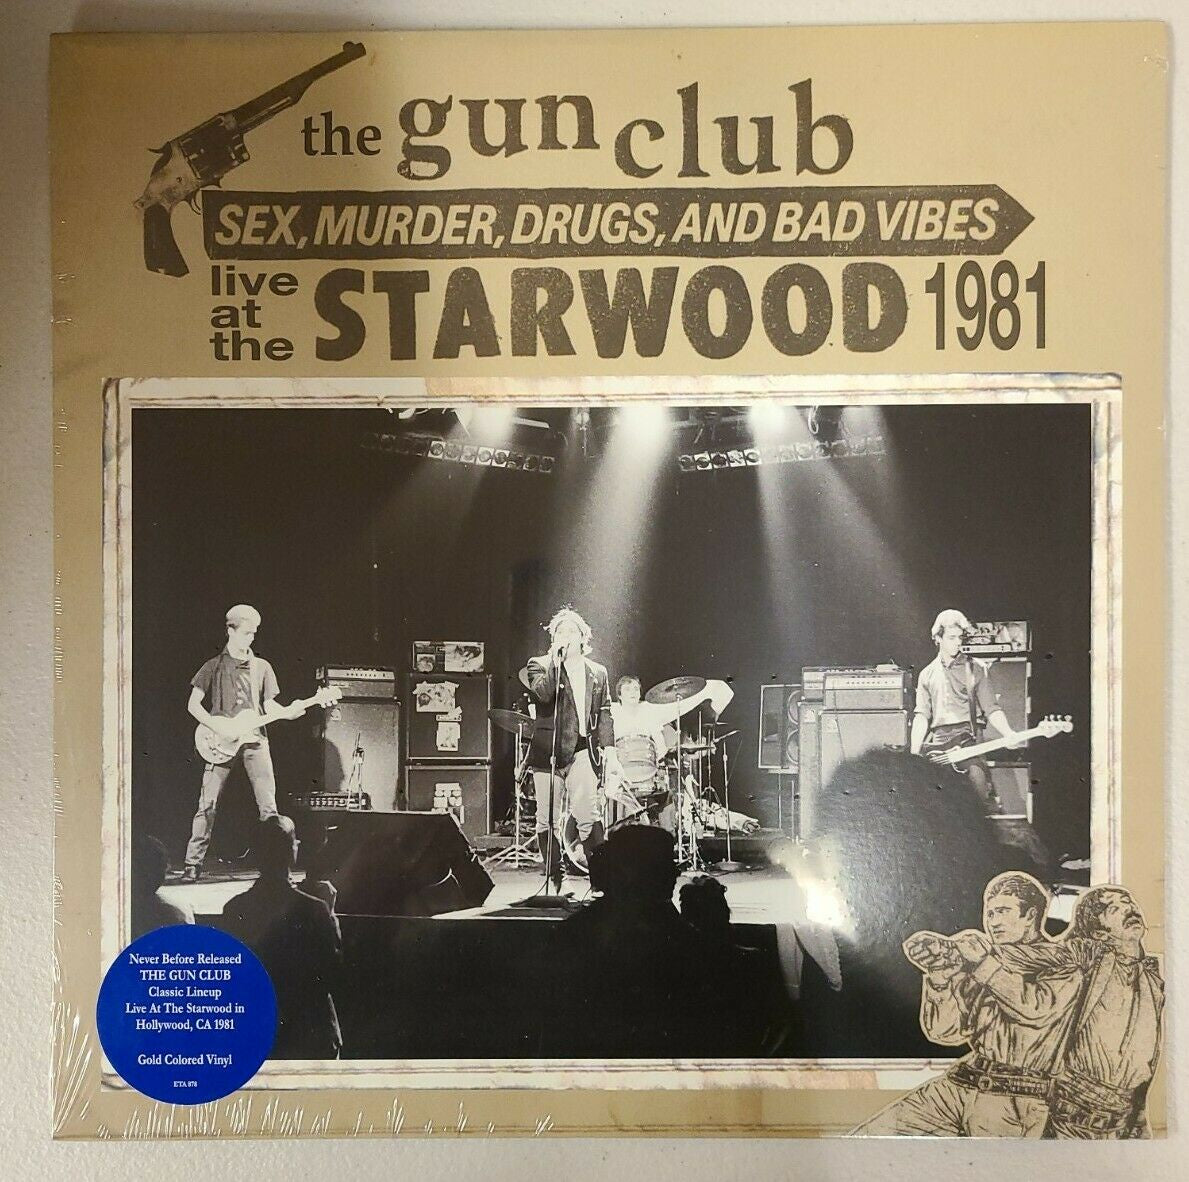 The Gun Club – Sex, Murder, Drugs, and Bad Vibes - Live at the Starwood 1981 - New LP Record Store Day Black Friday 2021 Blixa Sounds Gold Vinyl - Punk / Blues Rock